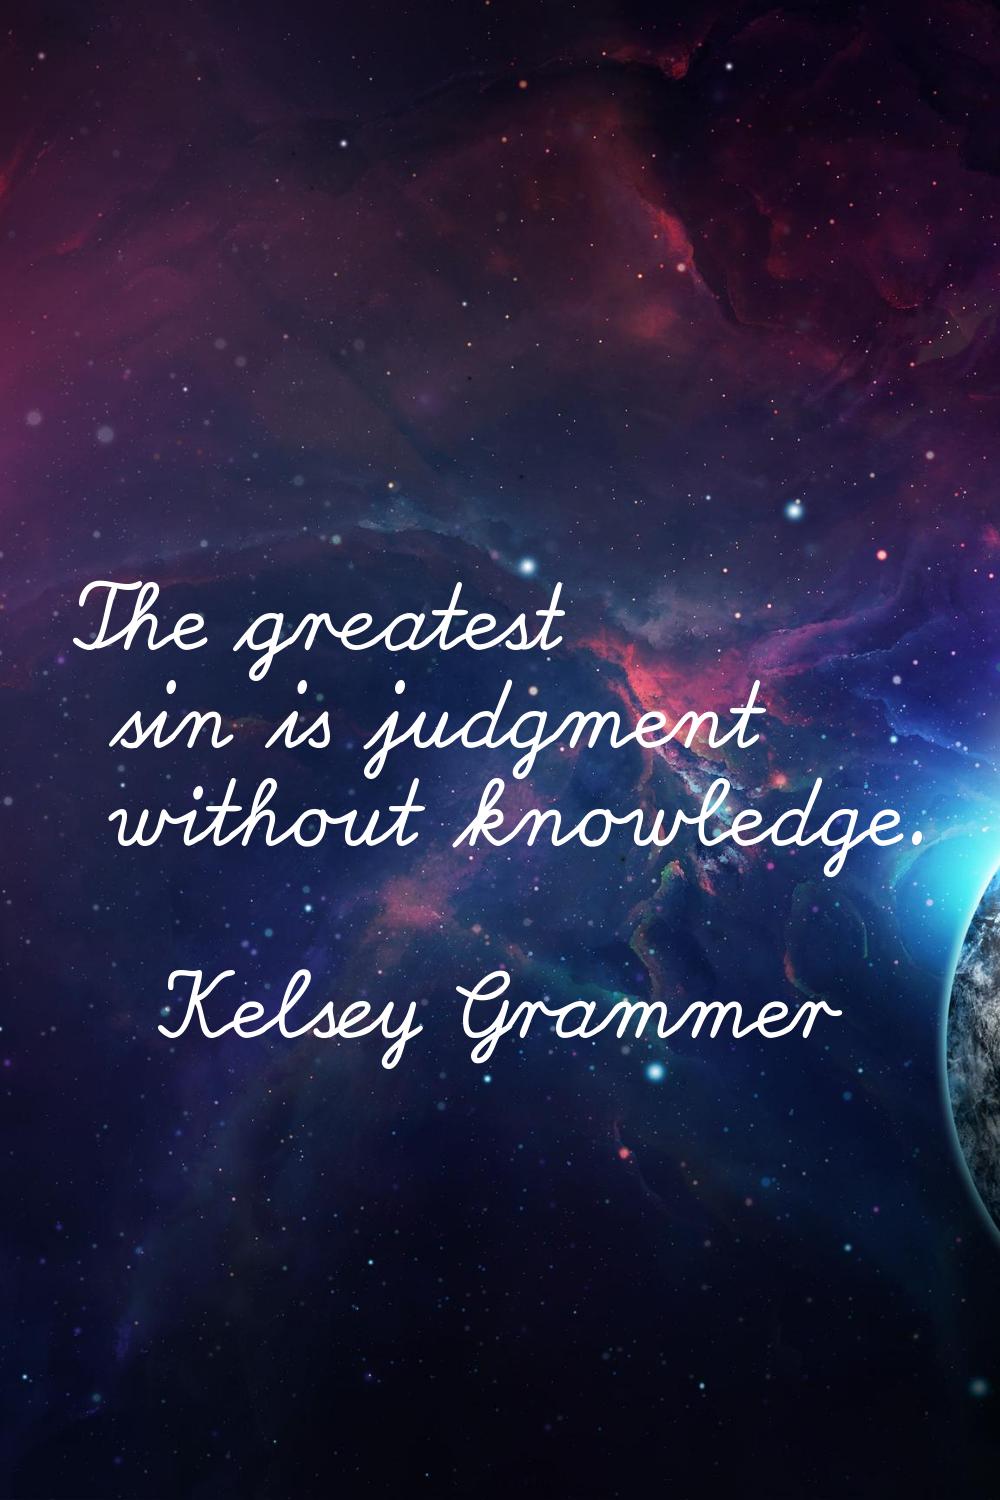 The greatest sin is judgment without knowledge.